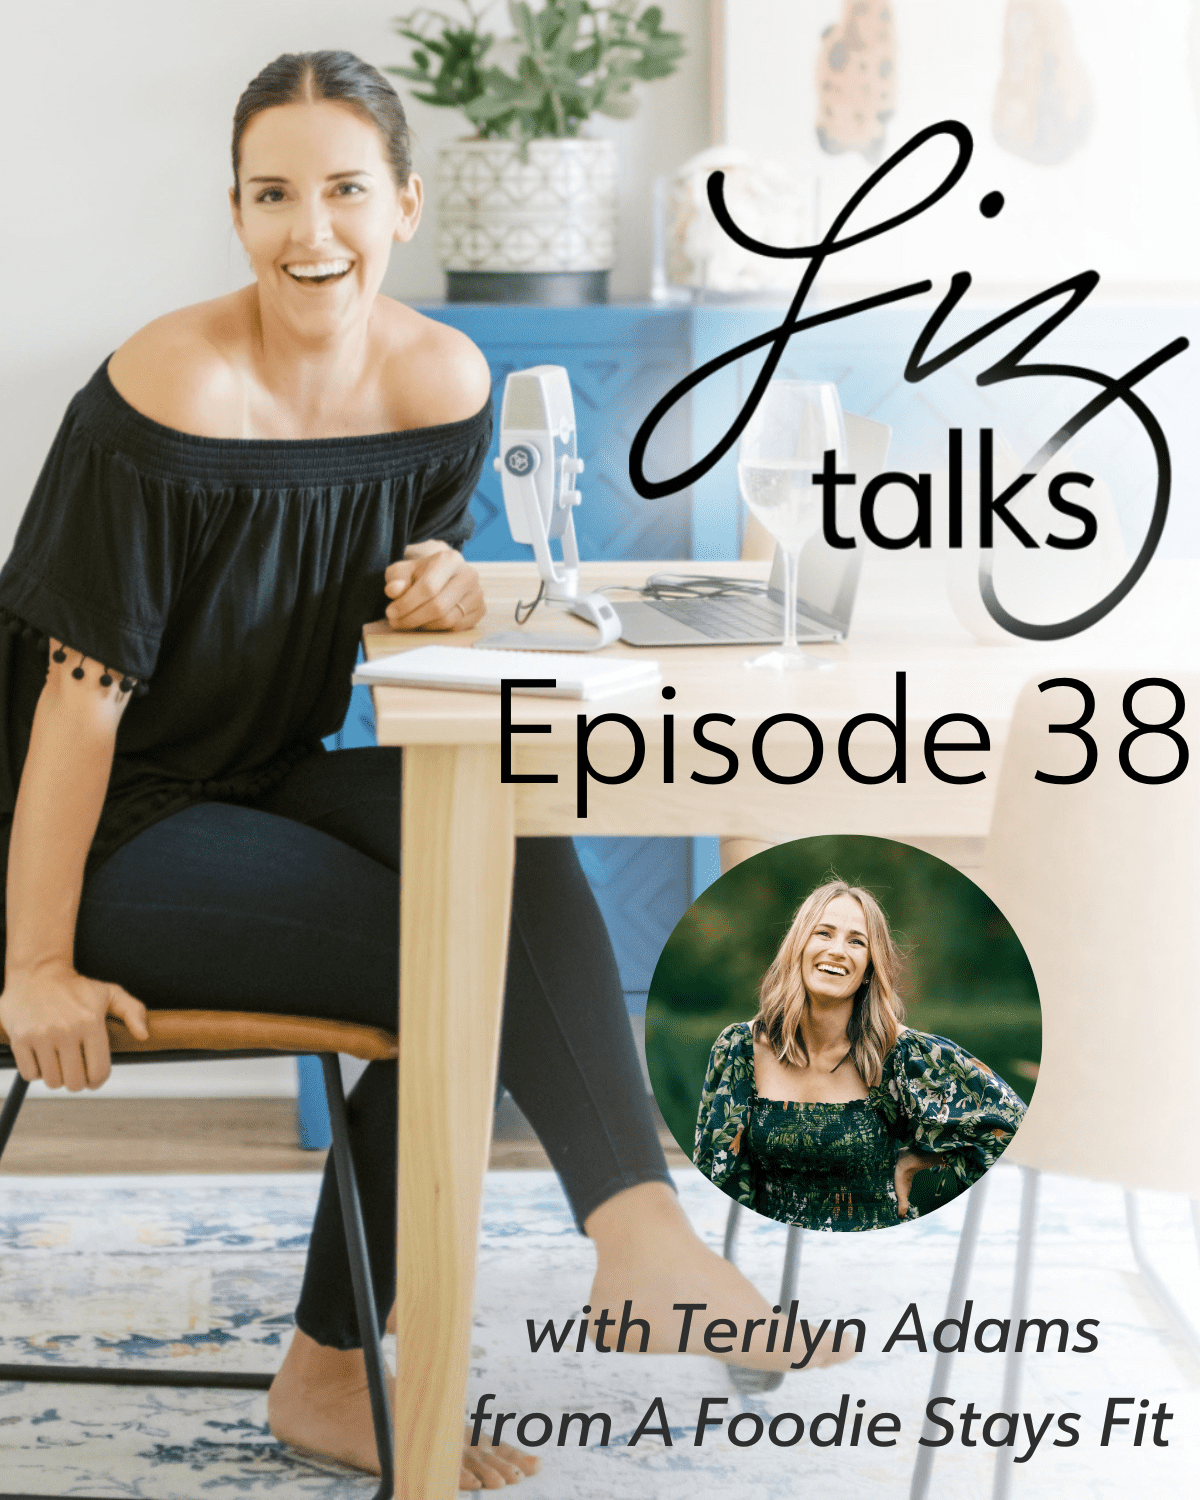 Liz Talks, Episode 38: Chatting with Terilyn Adams from A Foodie Stays Fit  - Real Food Liz